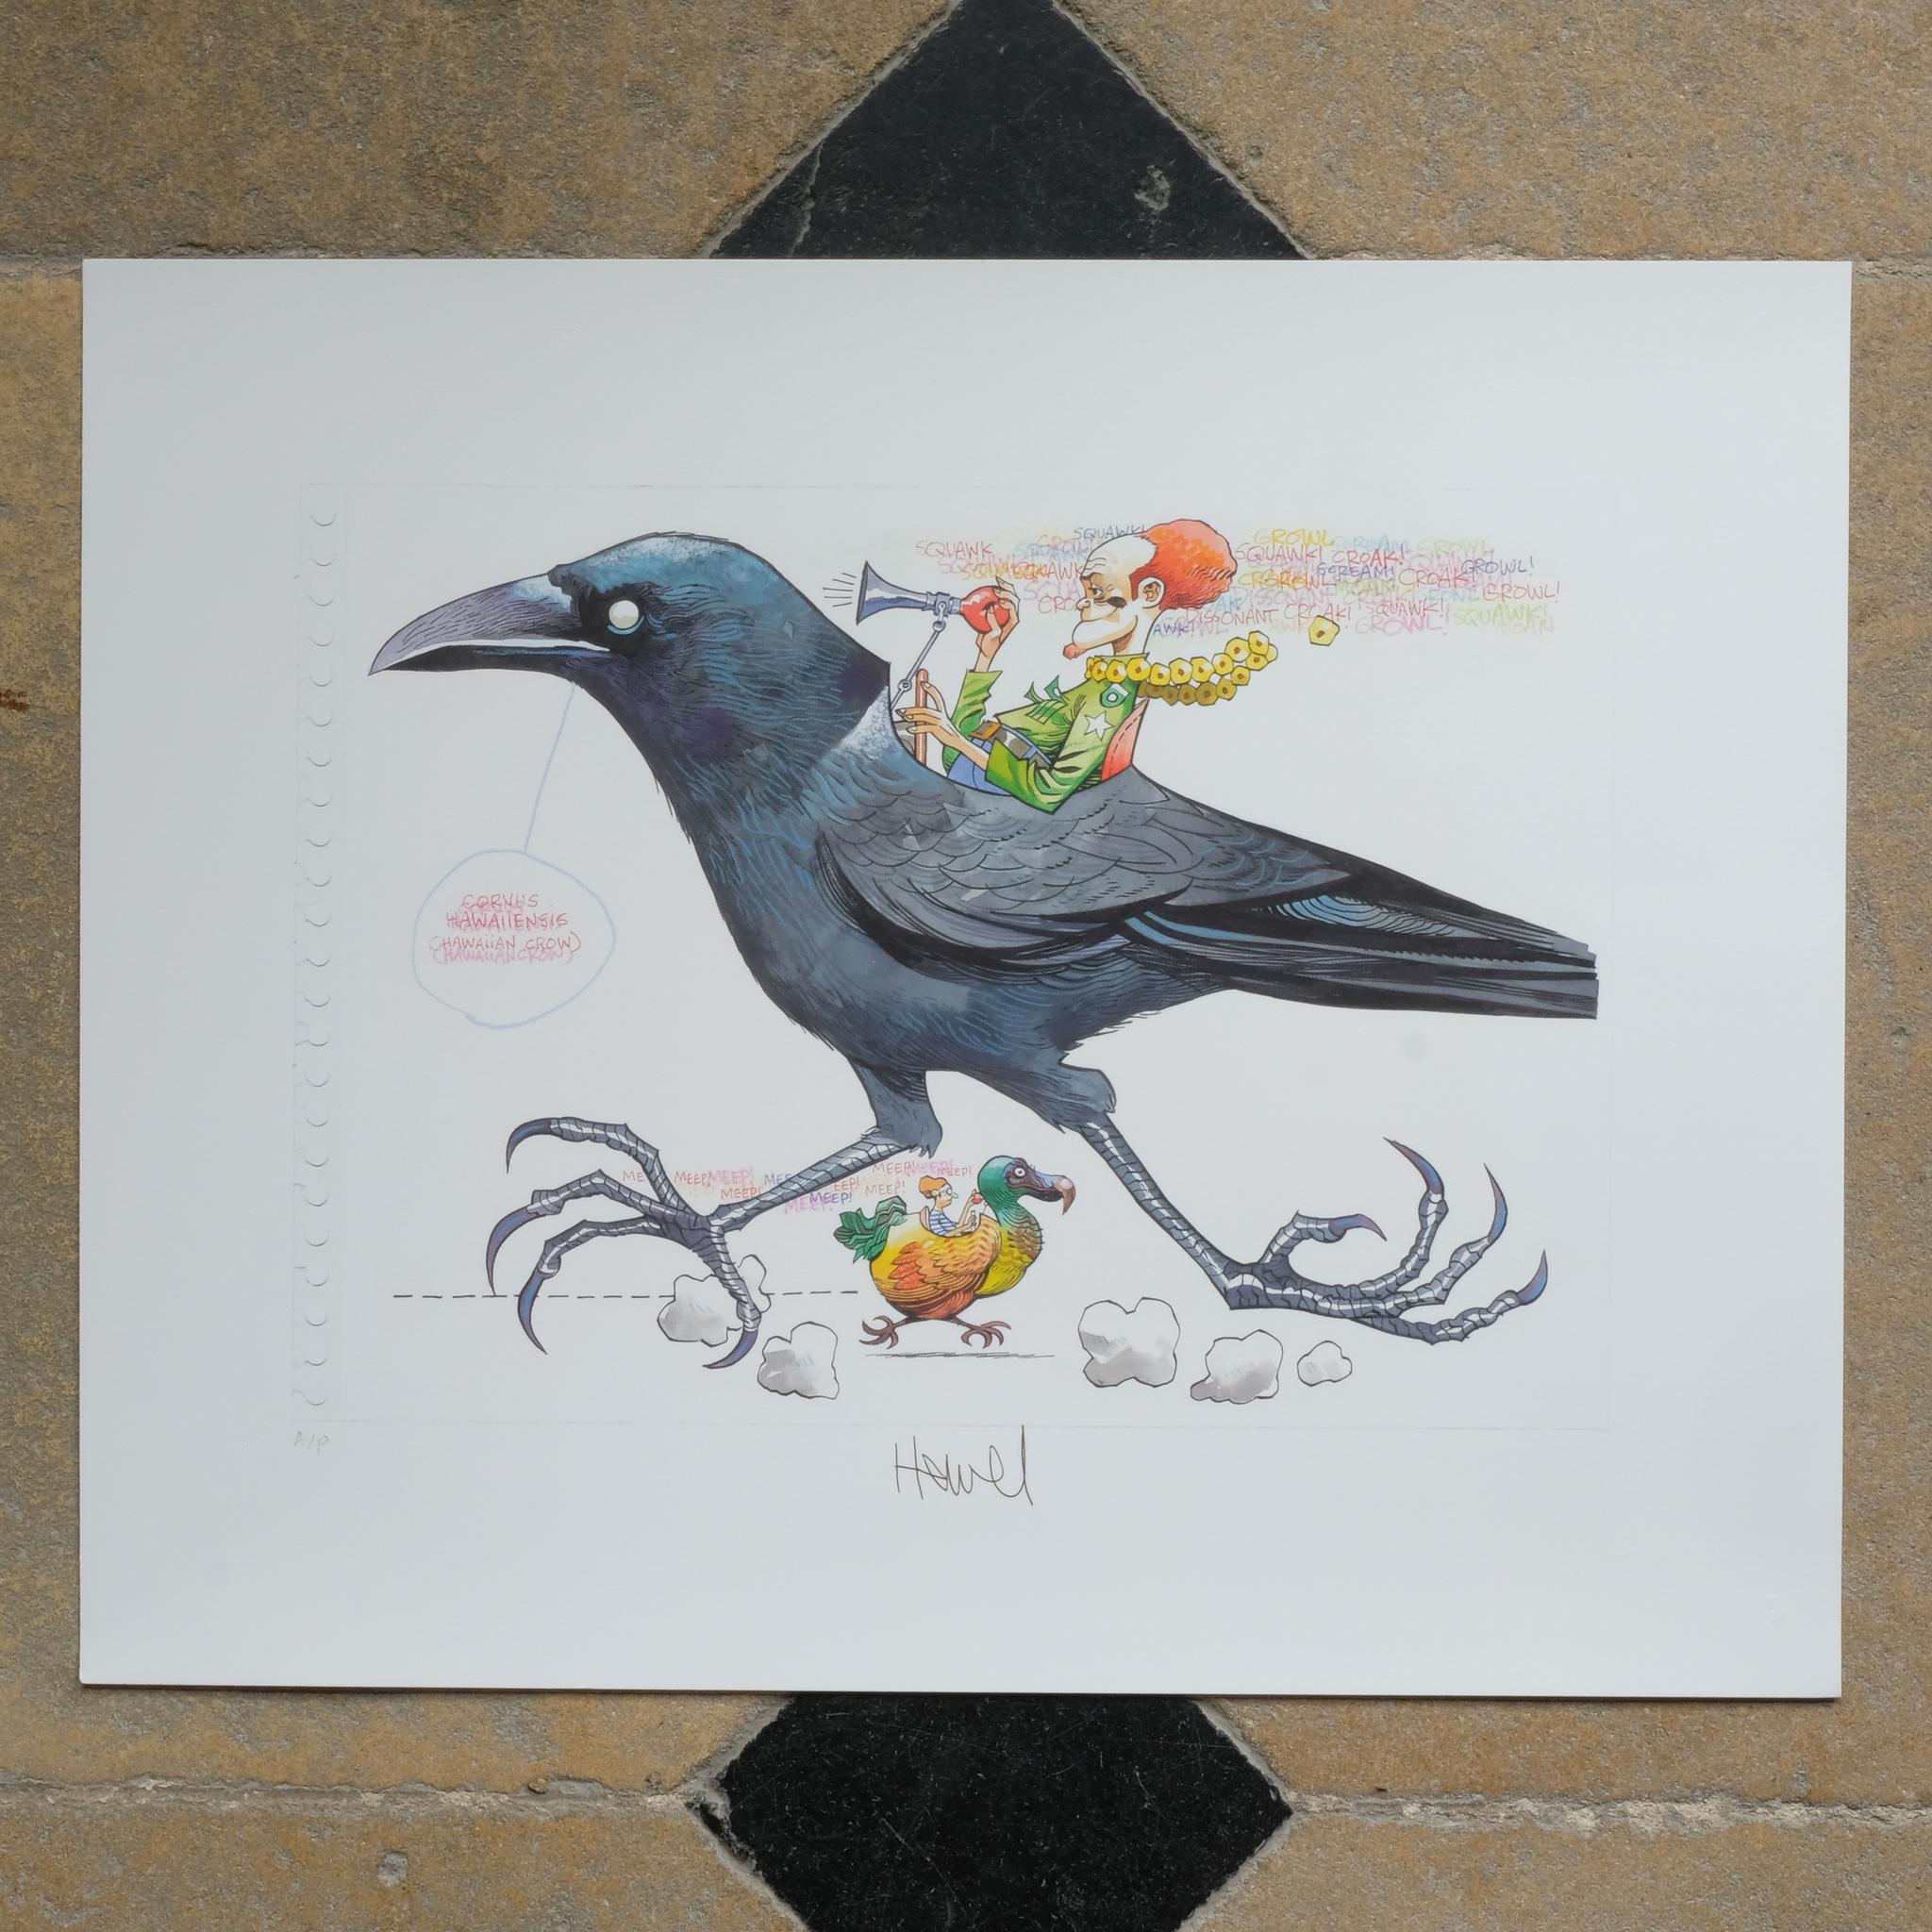 Giclee print in colours, 2011, on Somerset 330gsm paper, signed in pencil, inscribed ‘A/P’ (an artist’s proof aside from the edition of 125), from the portfolio Ghosts of Gone Birds, printed and published by Jealous, London, the full sheet, in